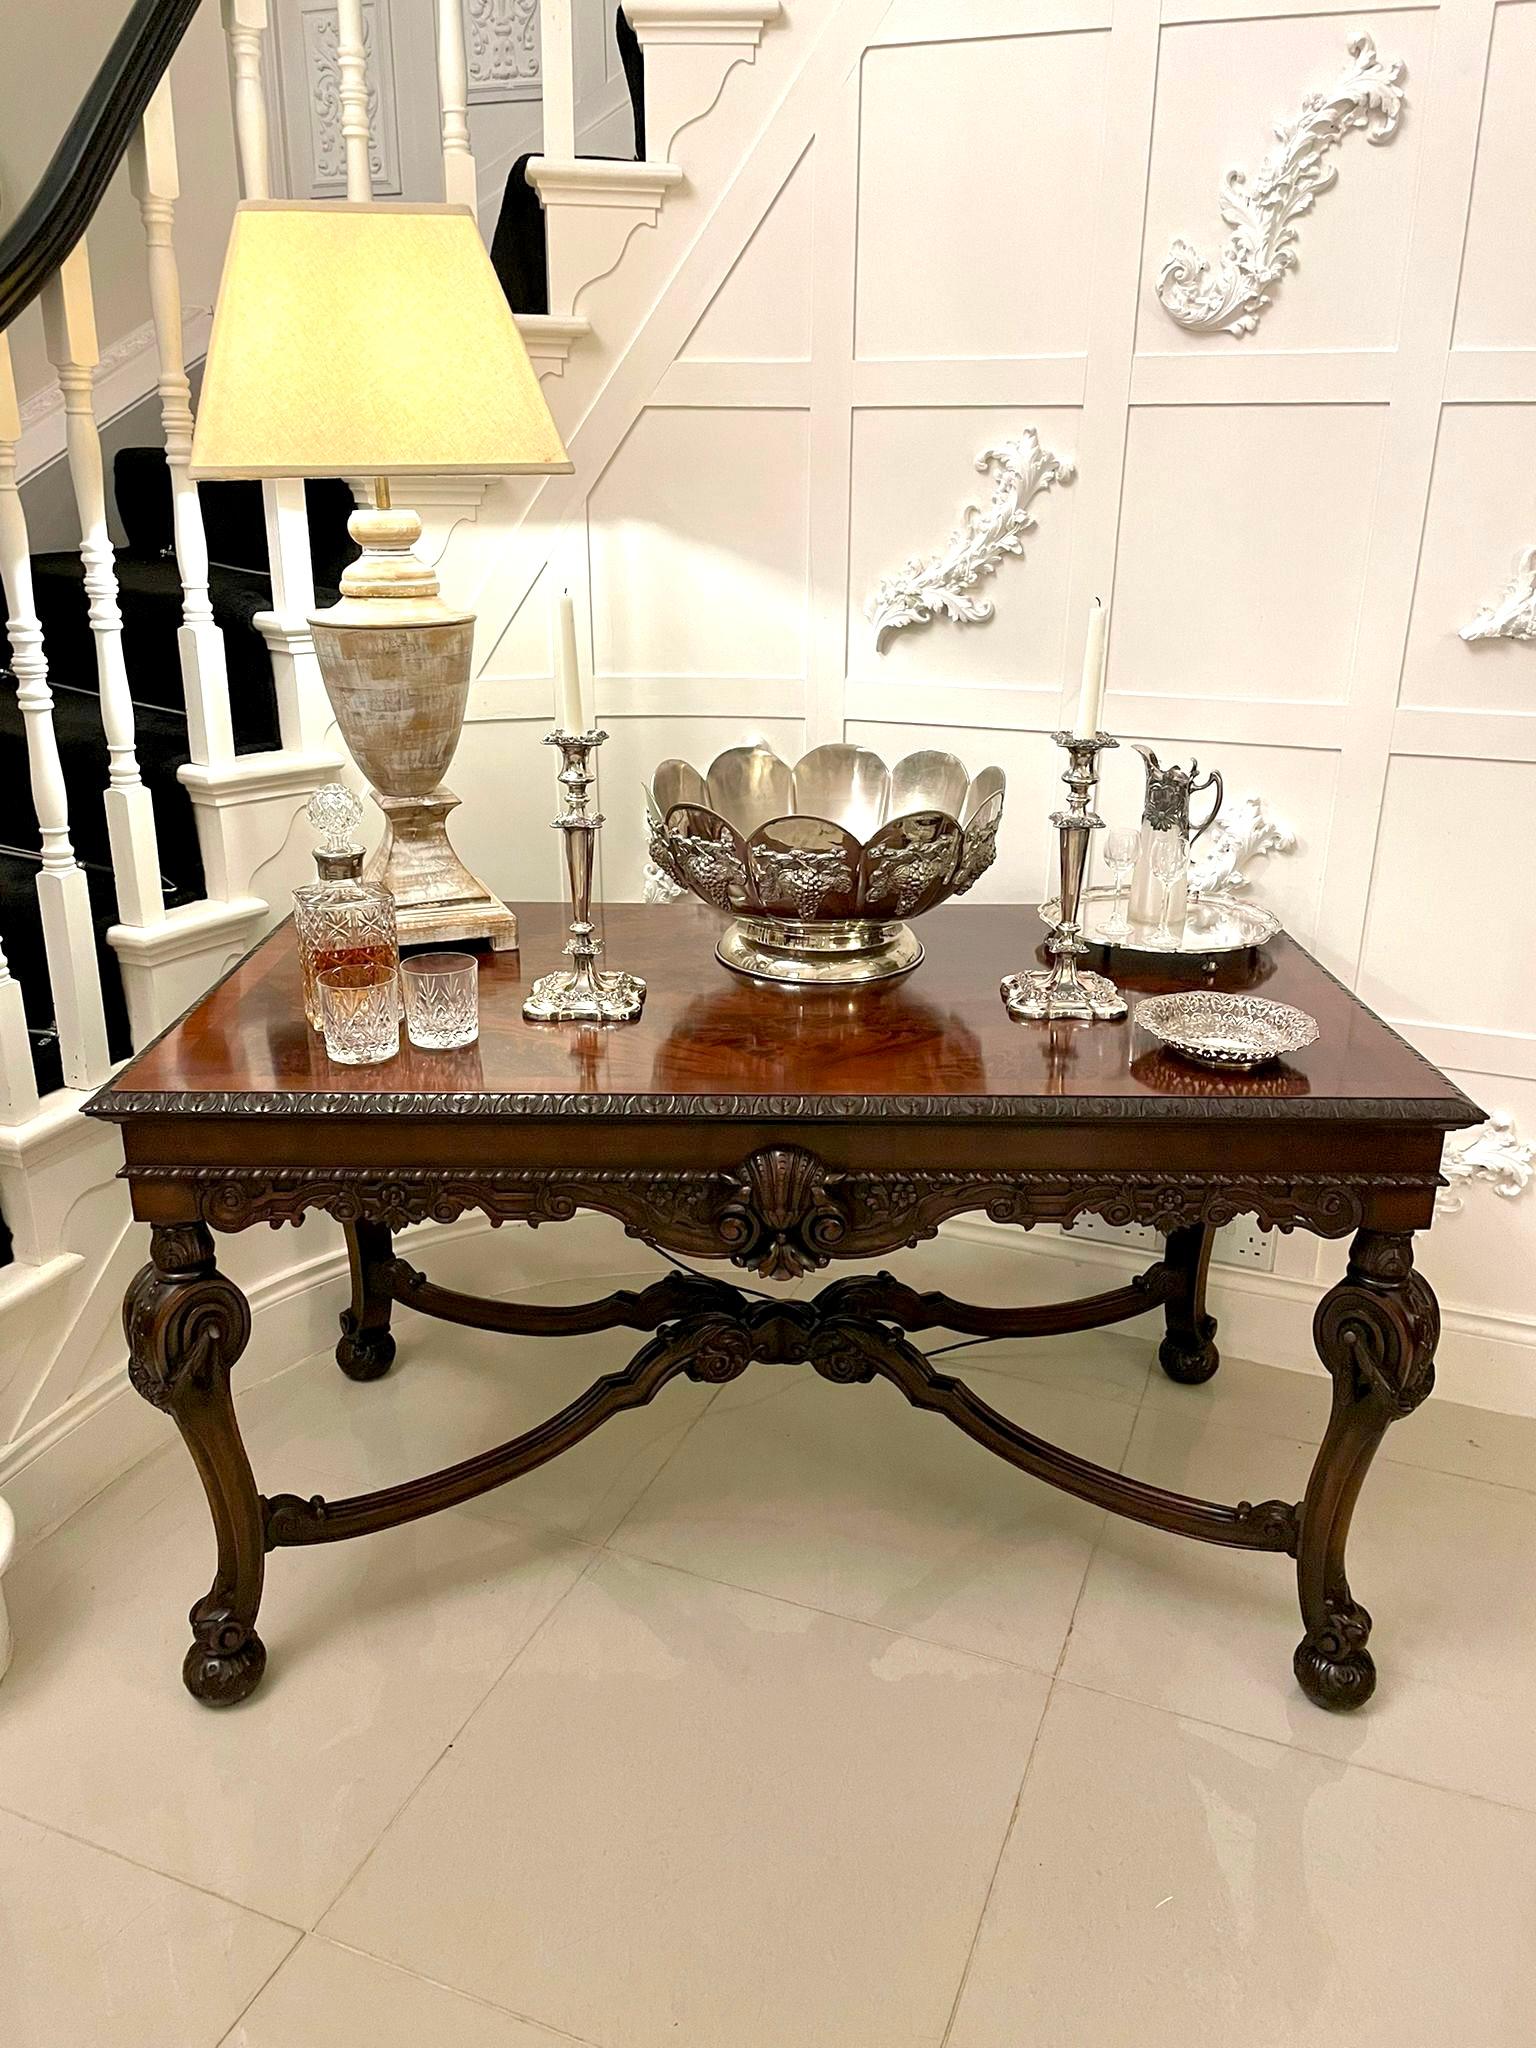 Outstanding quality antique Edwardian freestanding carved mahogany centre table having a fantastic quality figured mahogany crossbanded top with a quality carved edge above a carved mahogany shaped frieze with shells and scrolls. It stands on four